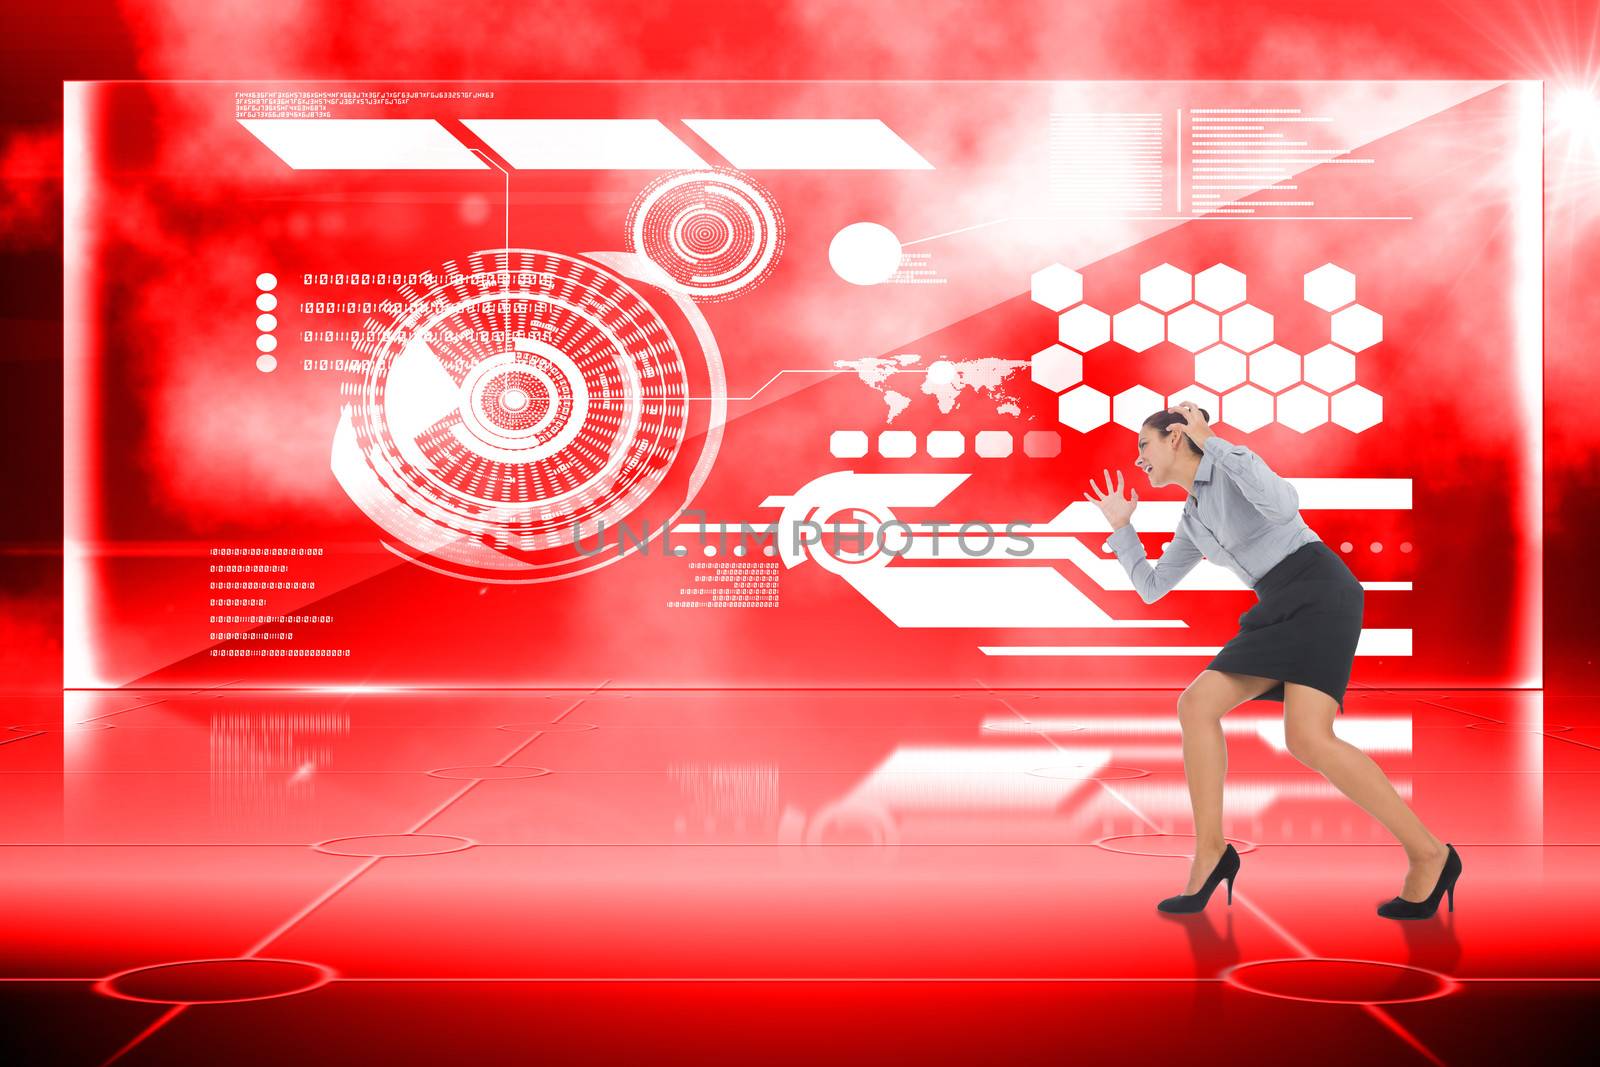 Furious businesswoman gesturing against futuristic technology interface